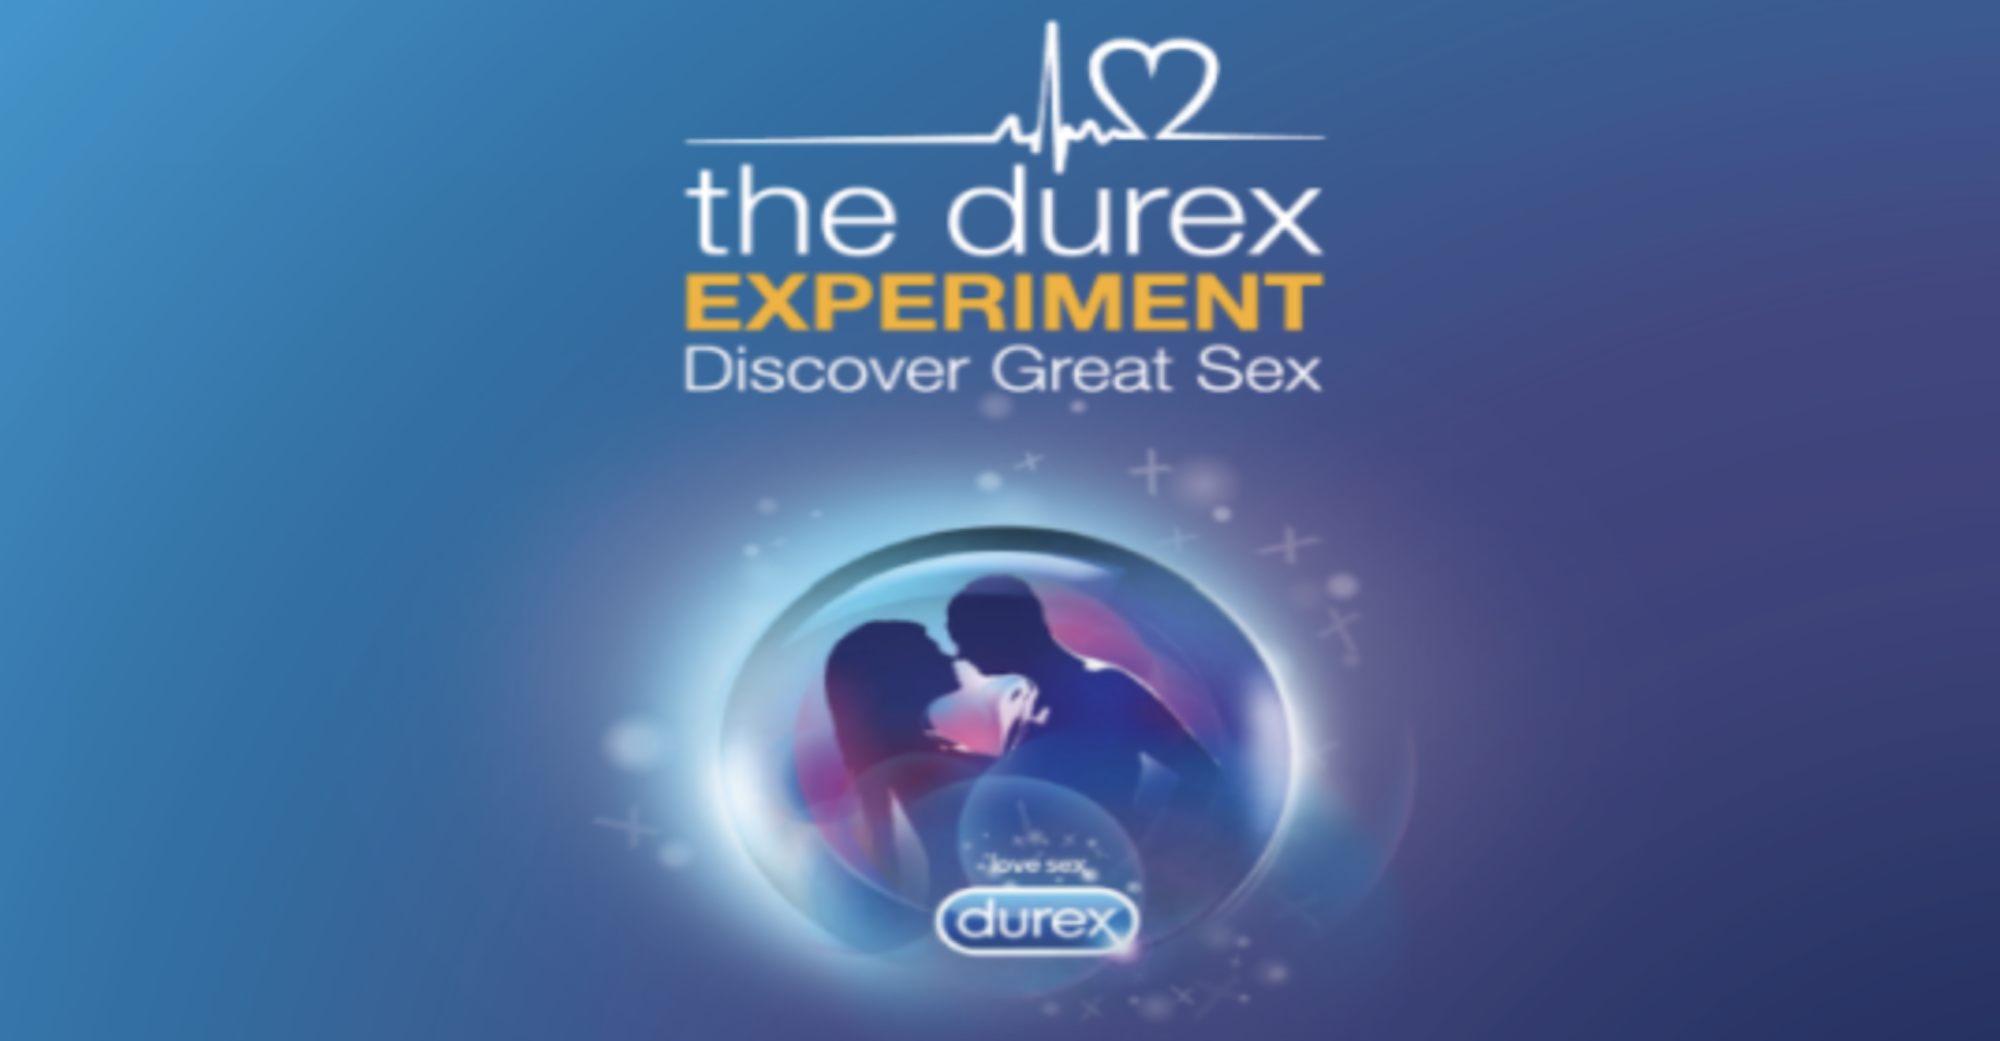 Durex Fined $120,000 for Inappropriate Advertisements on Chinese Social Media